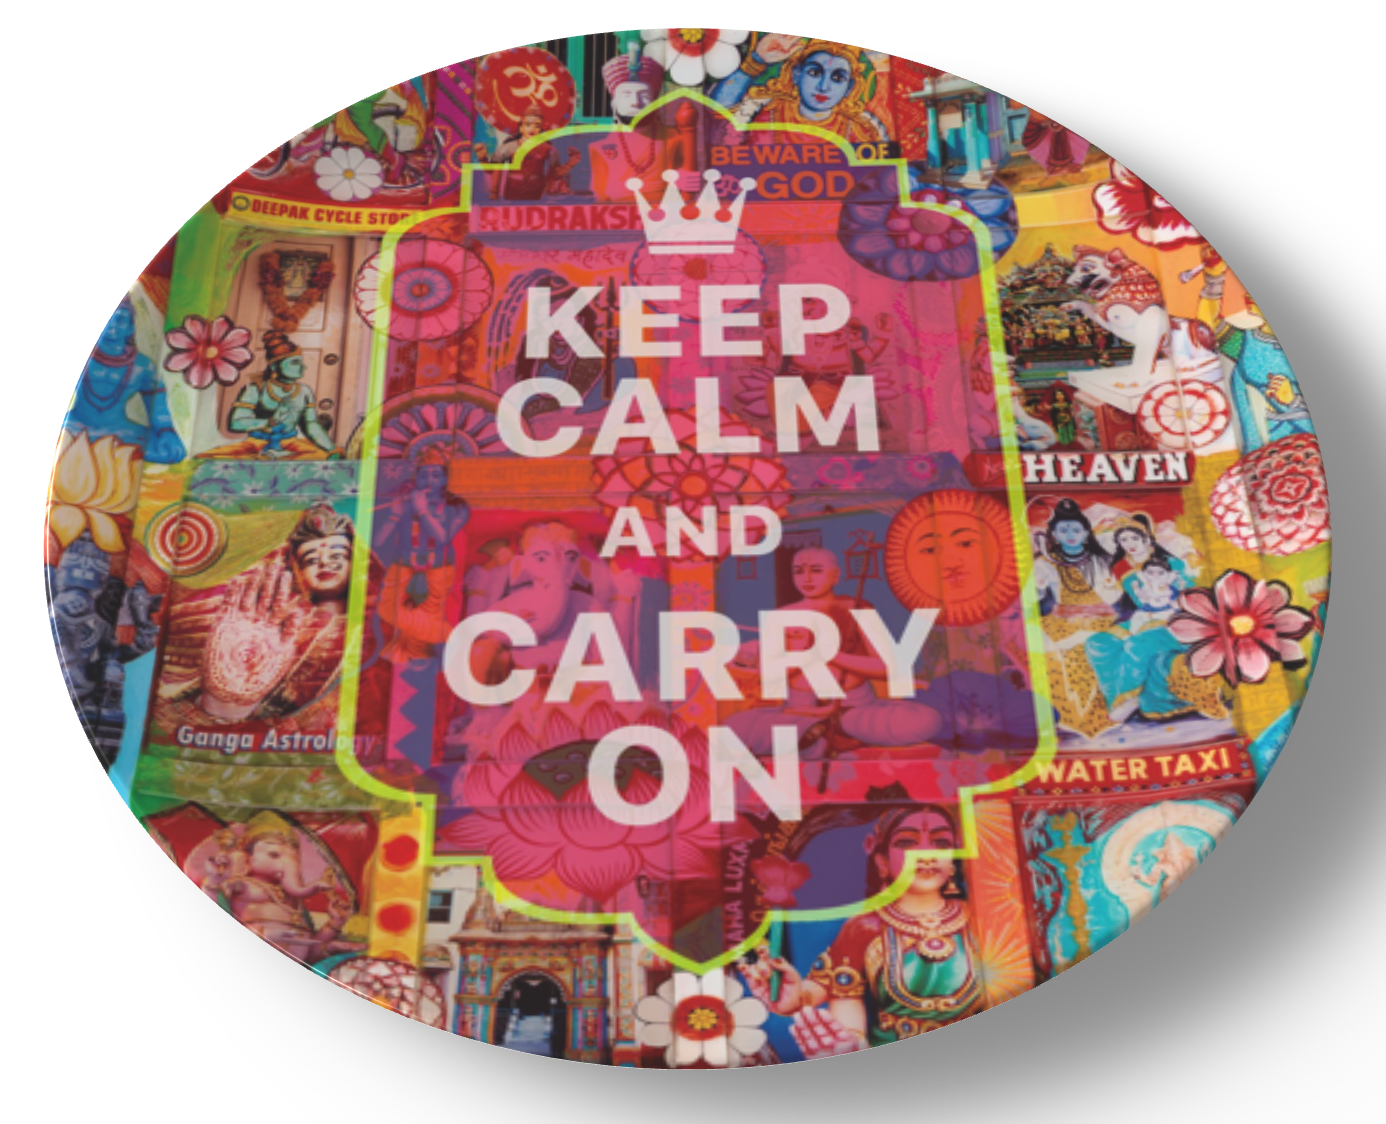 Keep calm and carry on cake stand